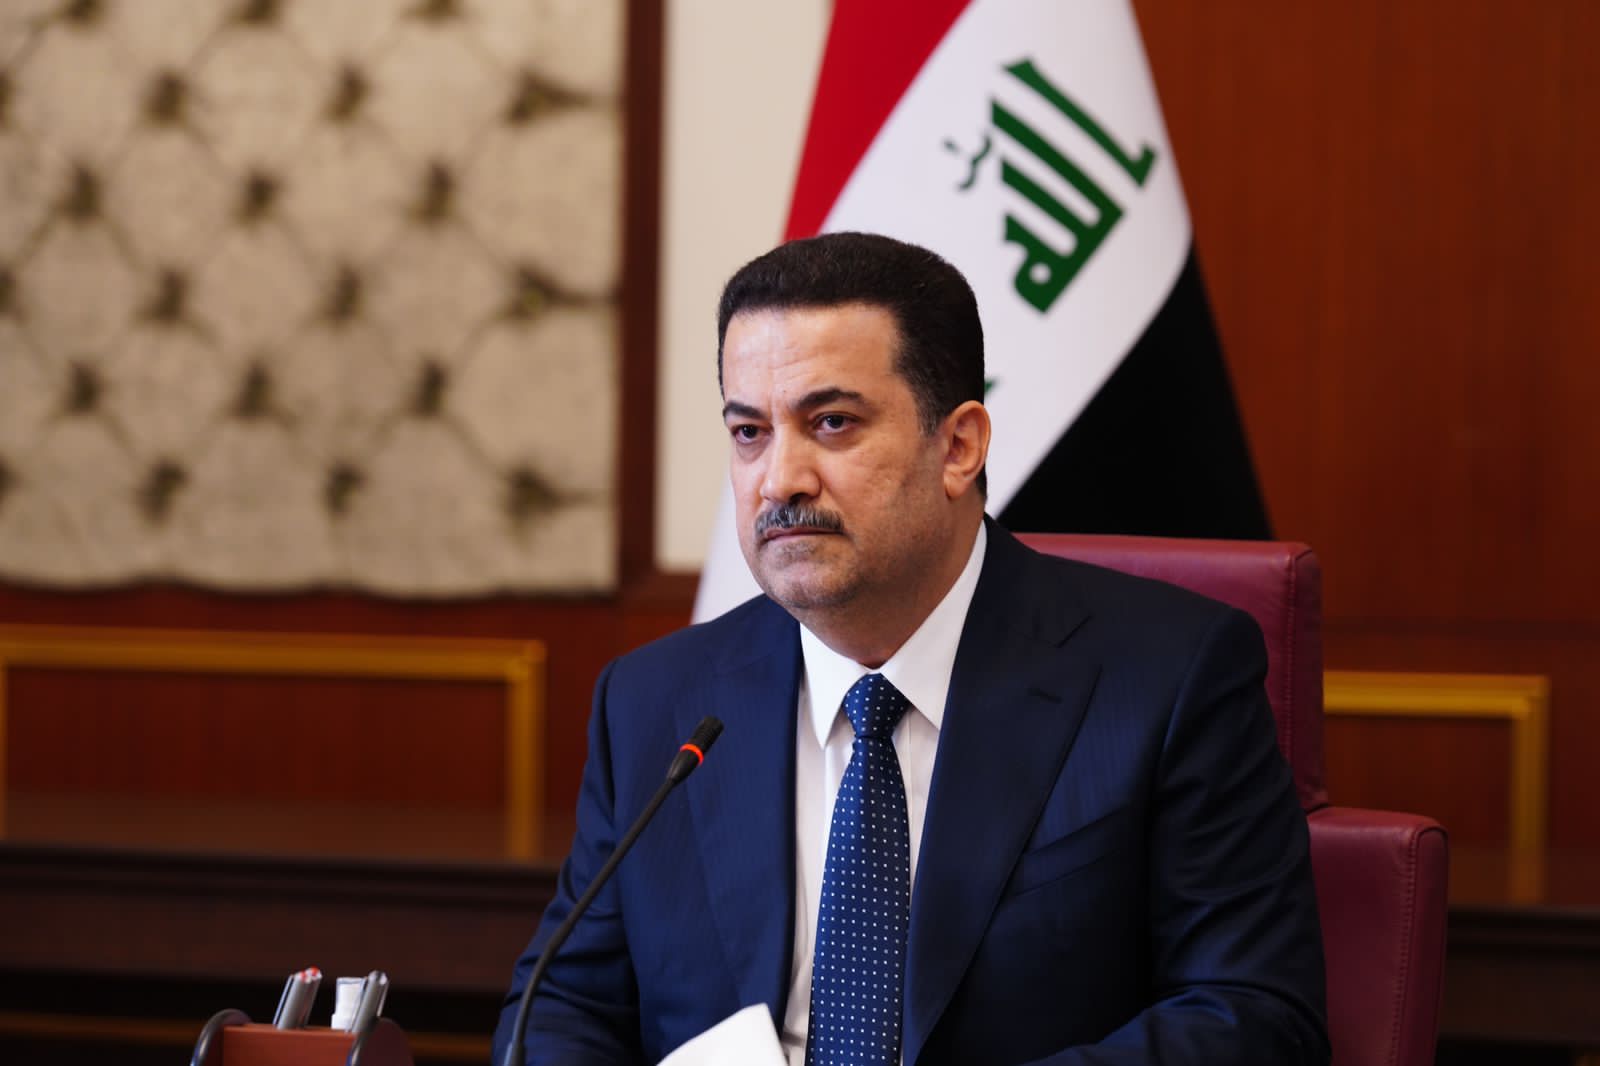 Iraqi prime minister calls for dialogue to ensure stability in Kurdistan, Iraq